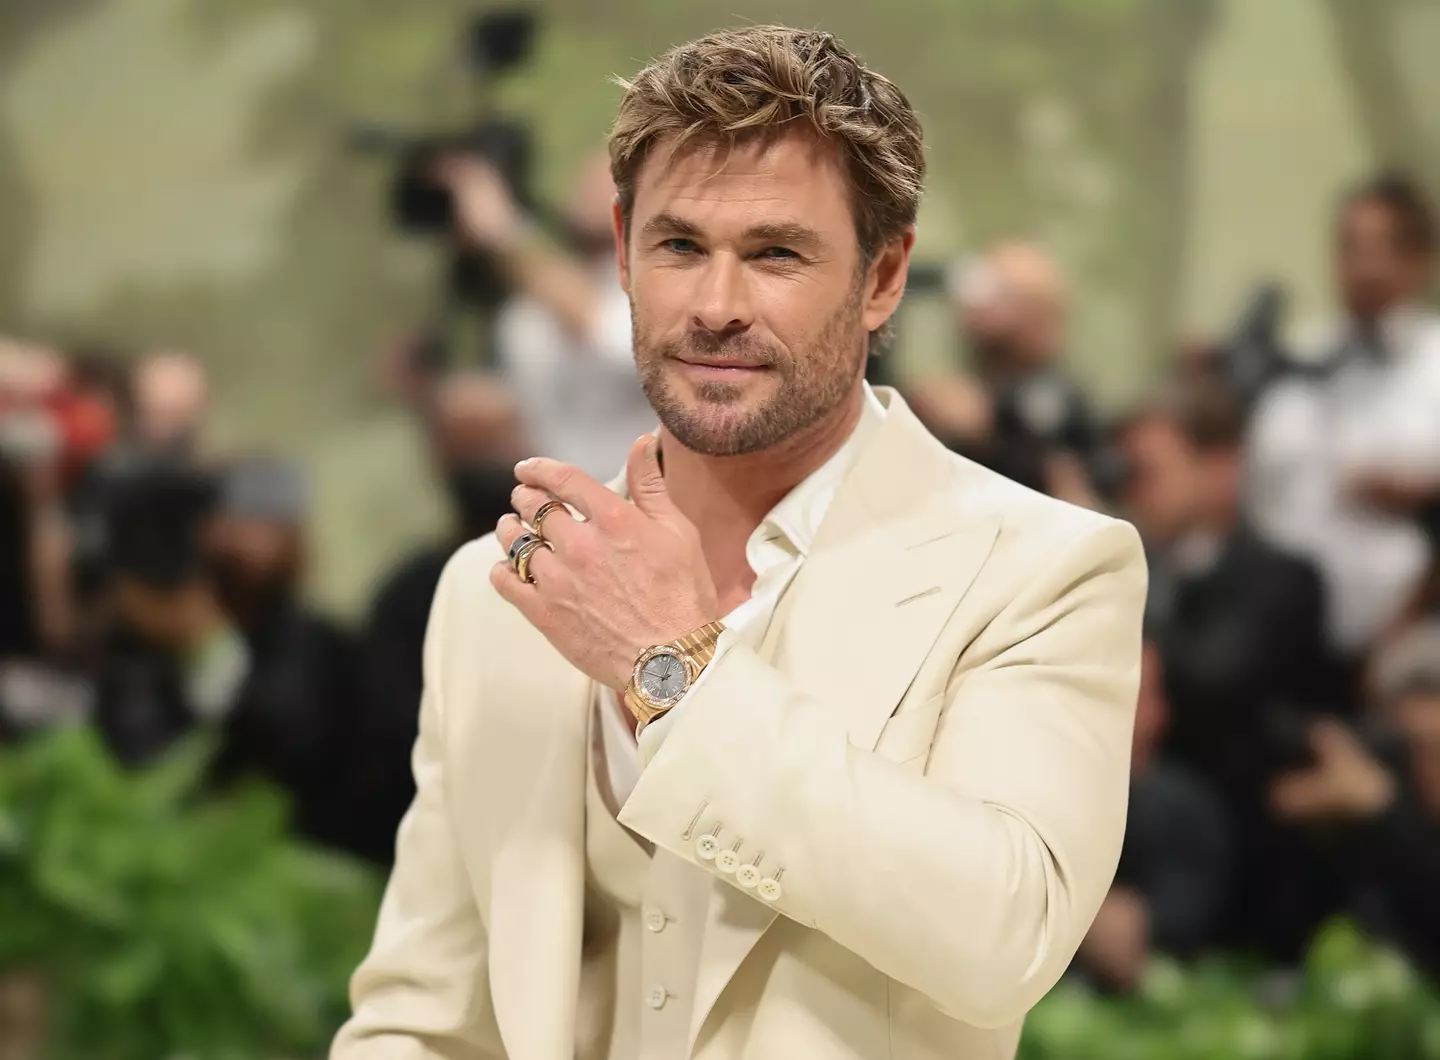 Hemsworth admitted he took lots of 'selfies' at the gala. (Dimitrios Kambouris/Getty Images for The Met Museum/Vogue) 